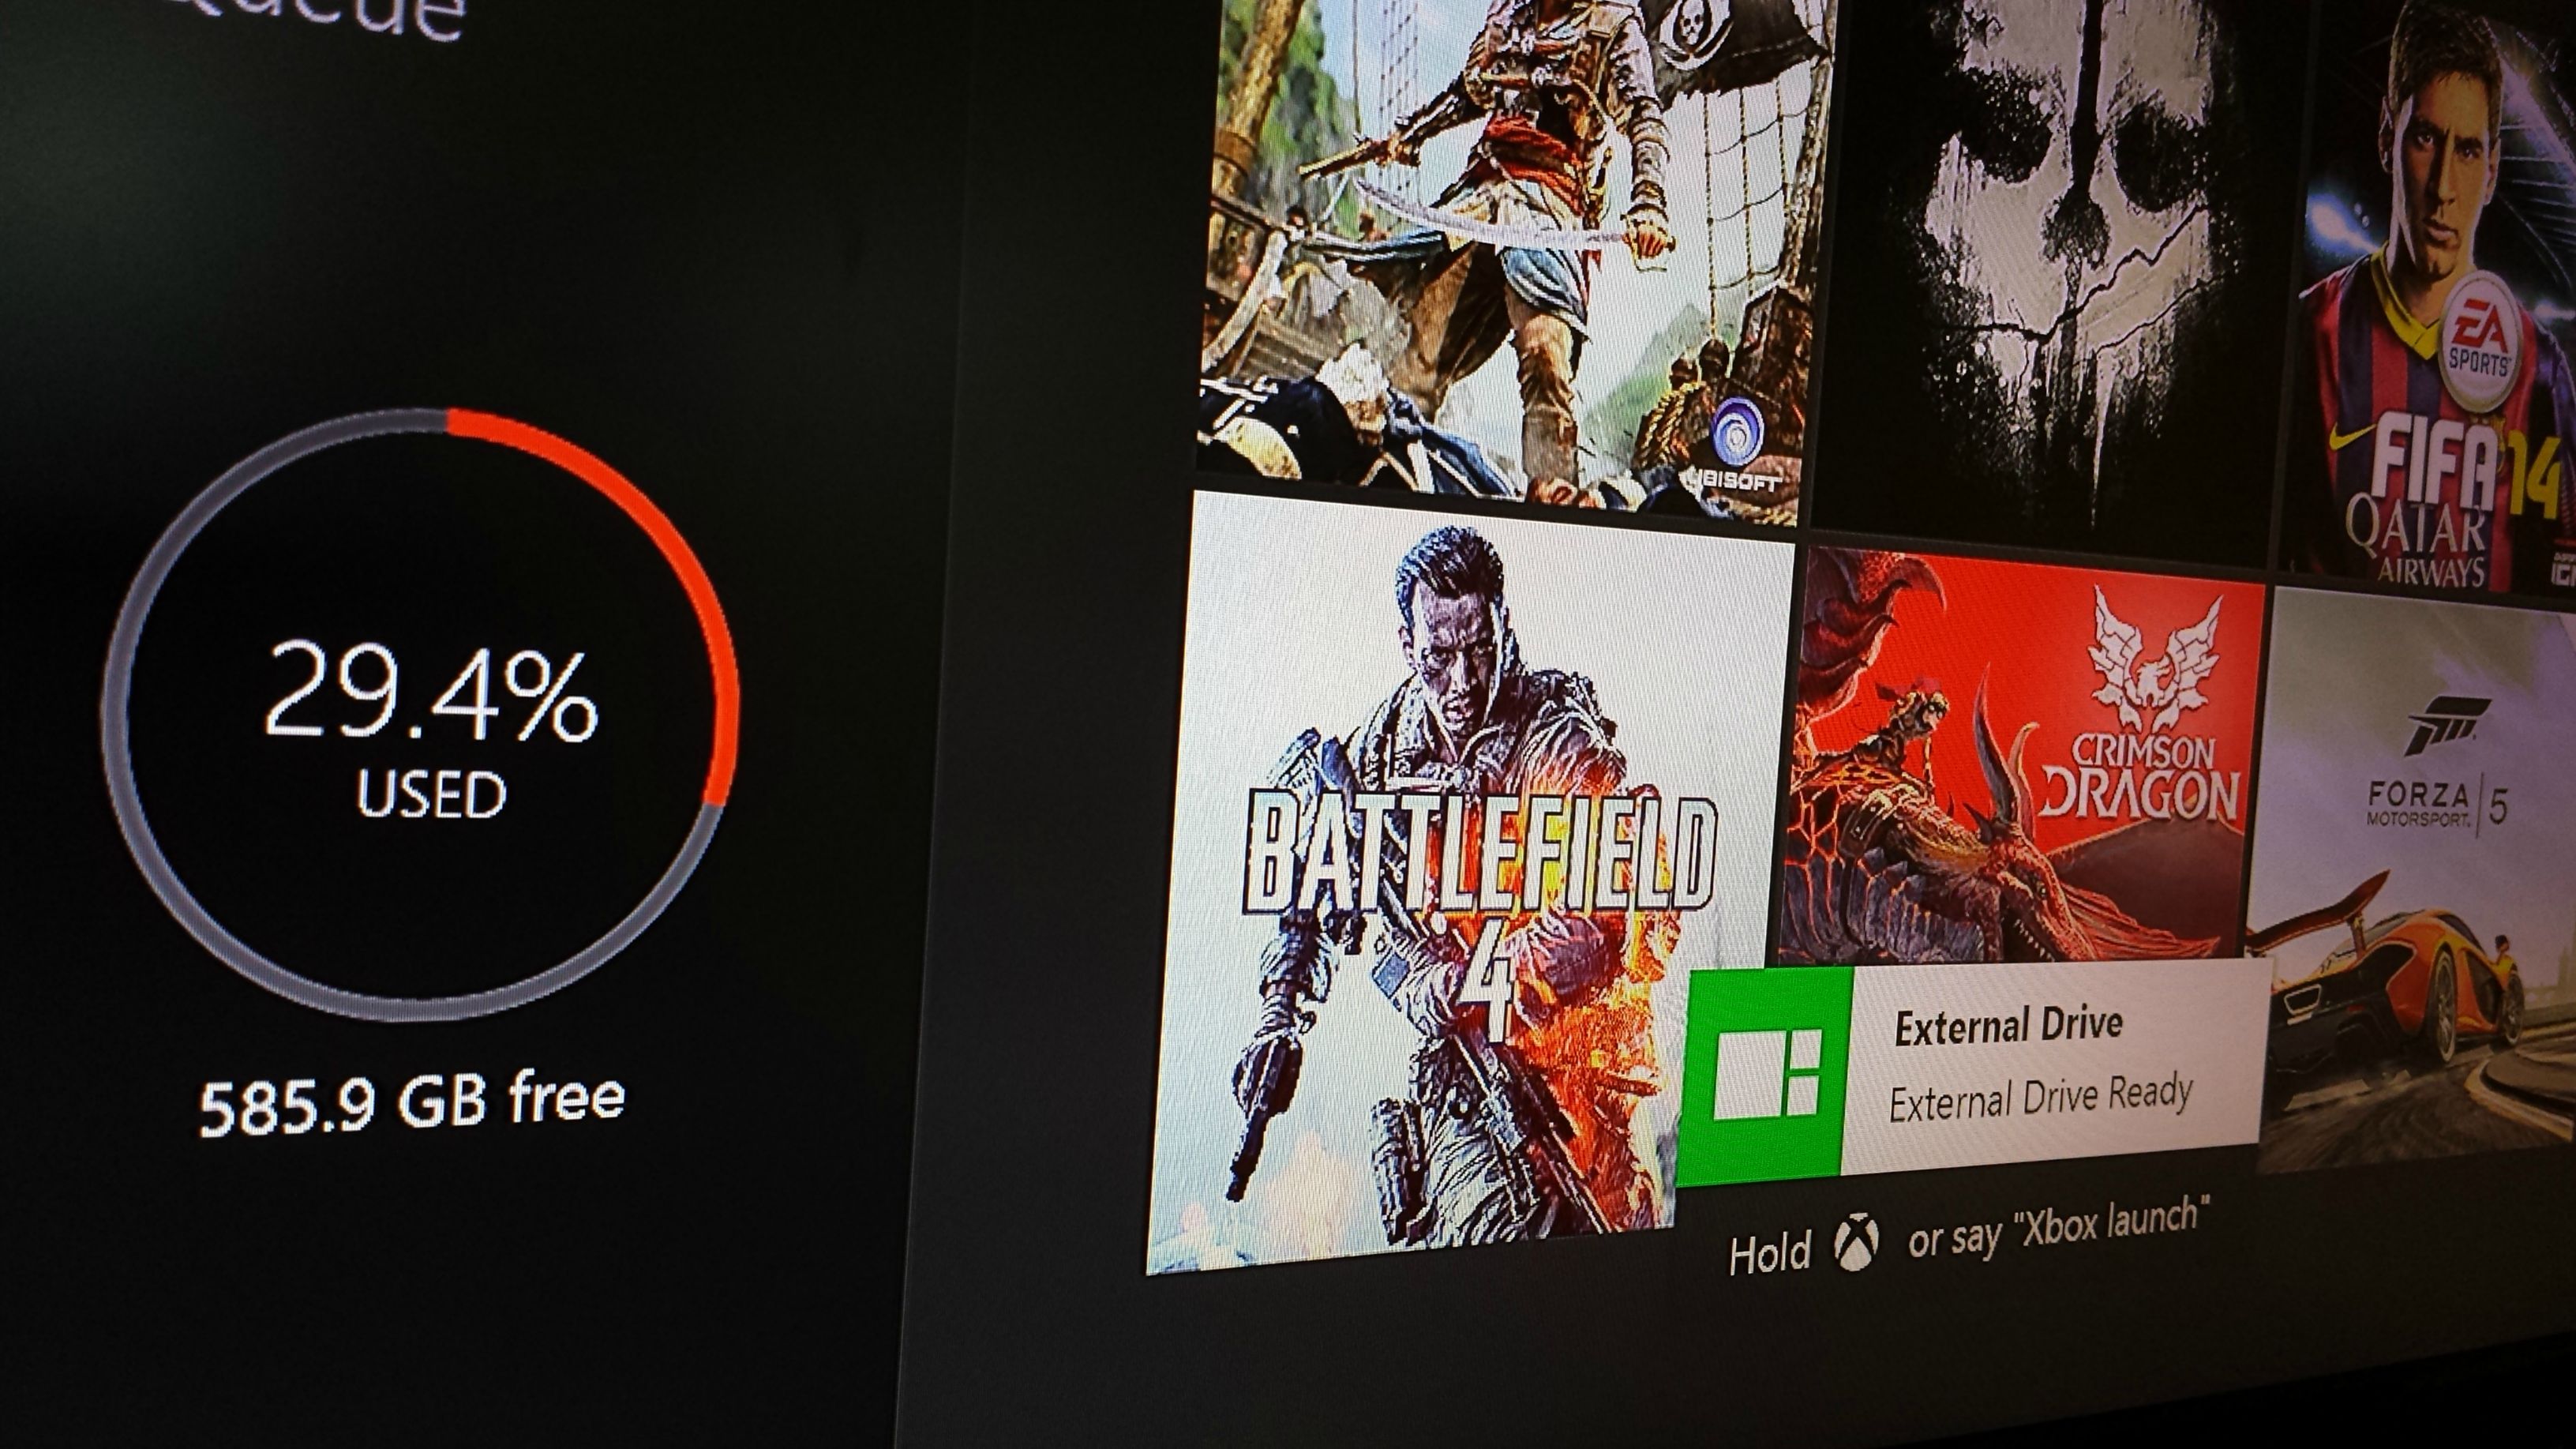 Xbox One to get External Drive support update soon?